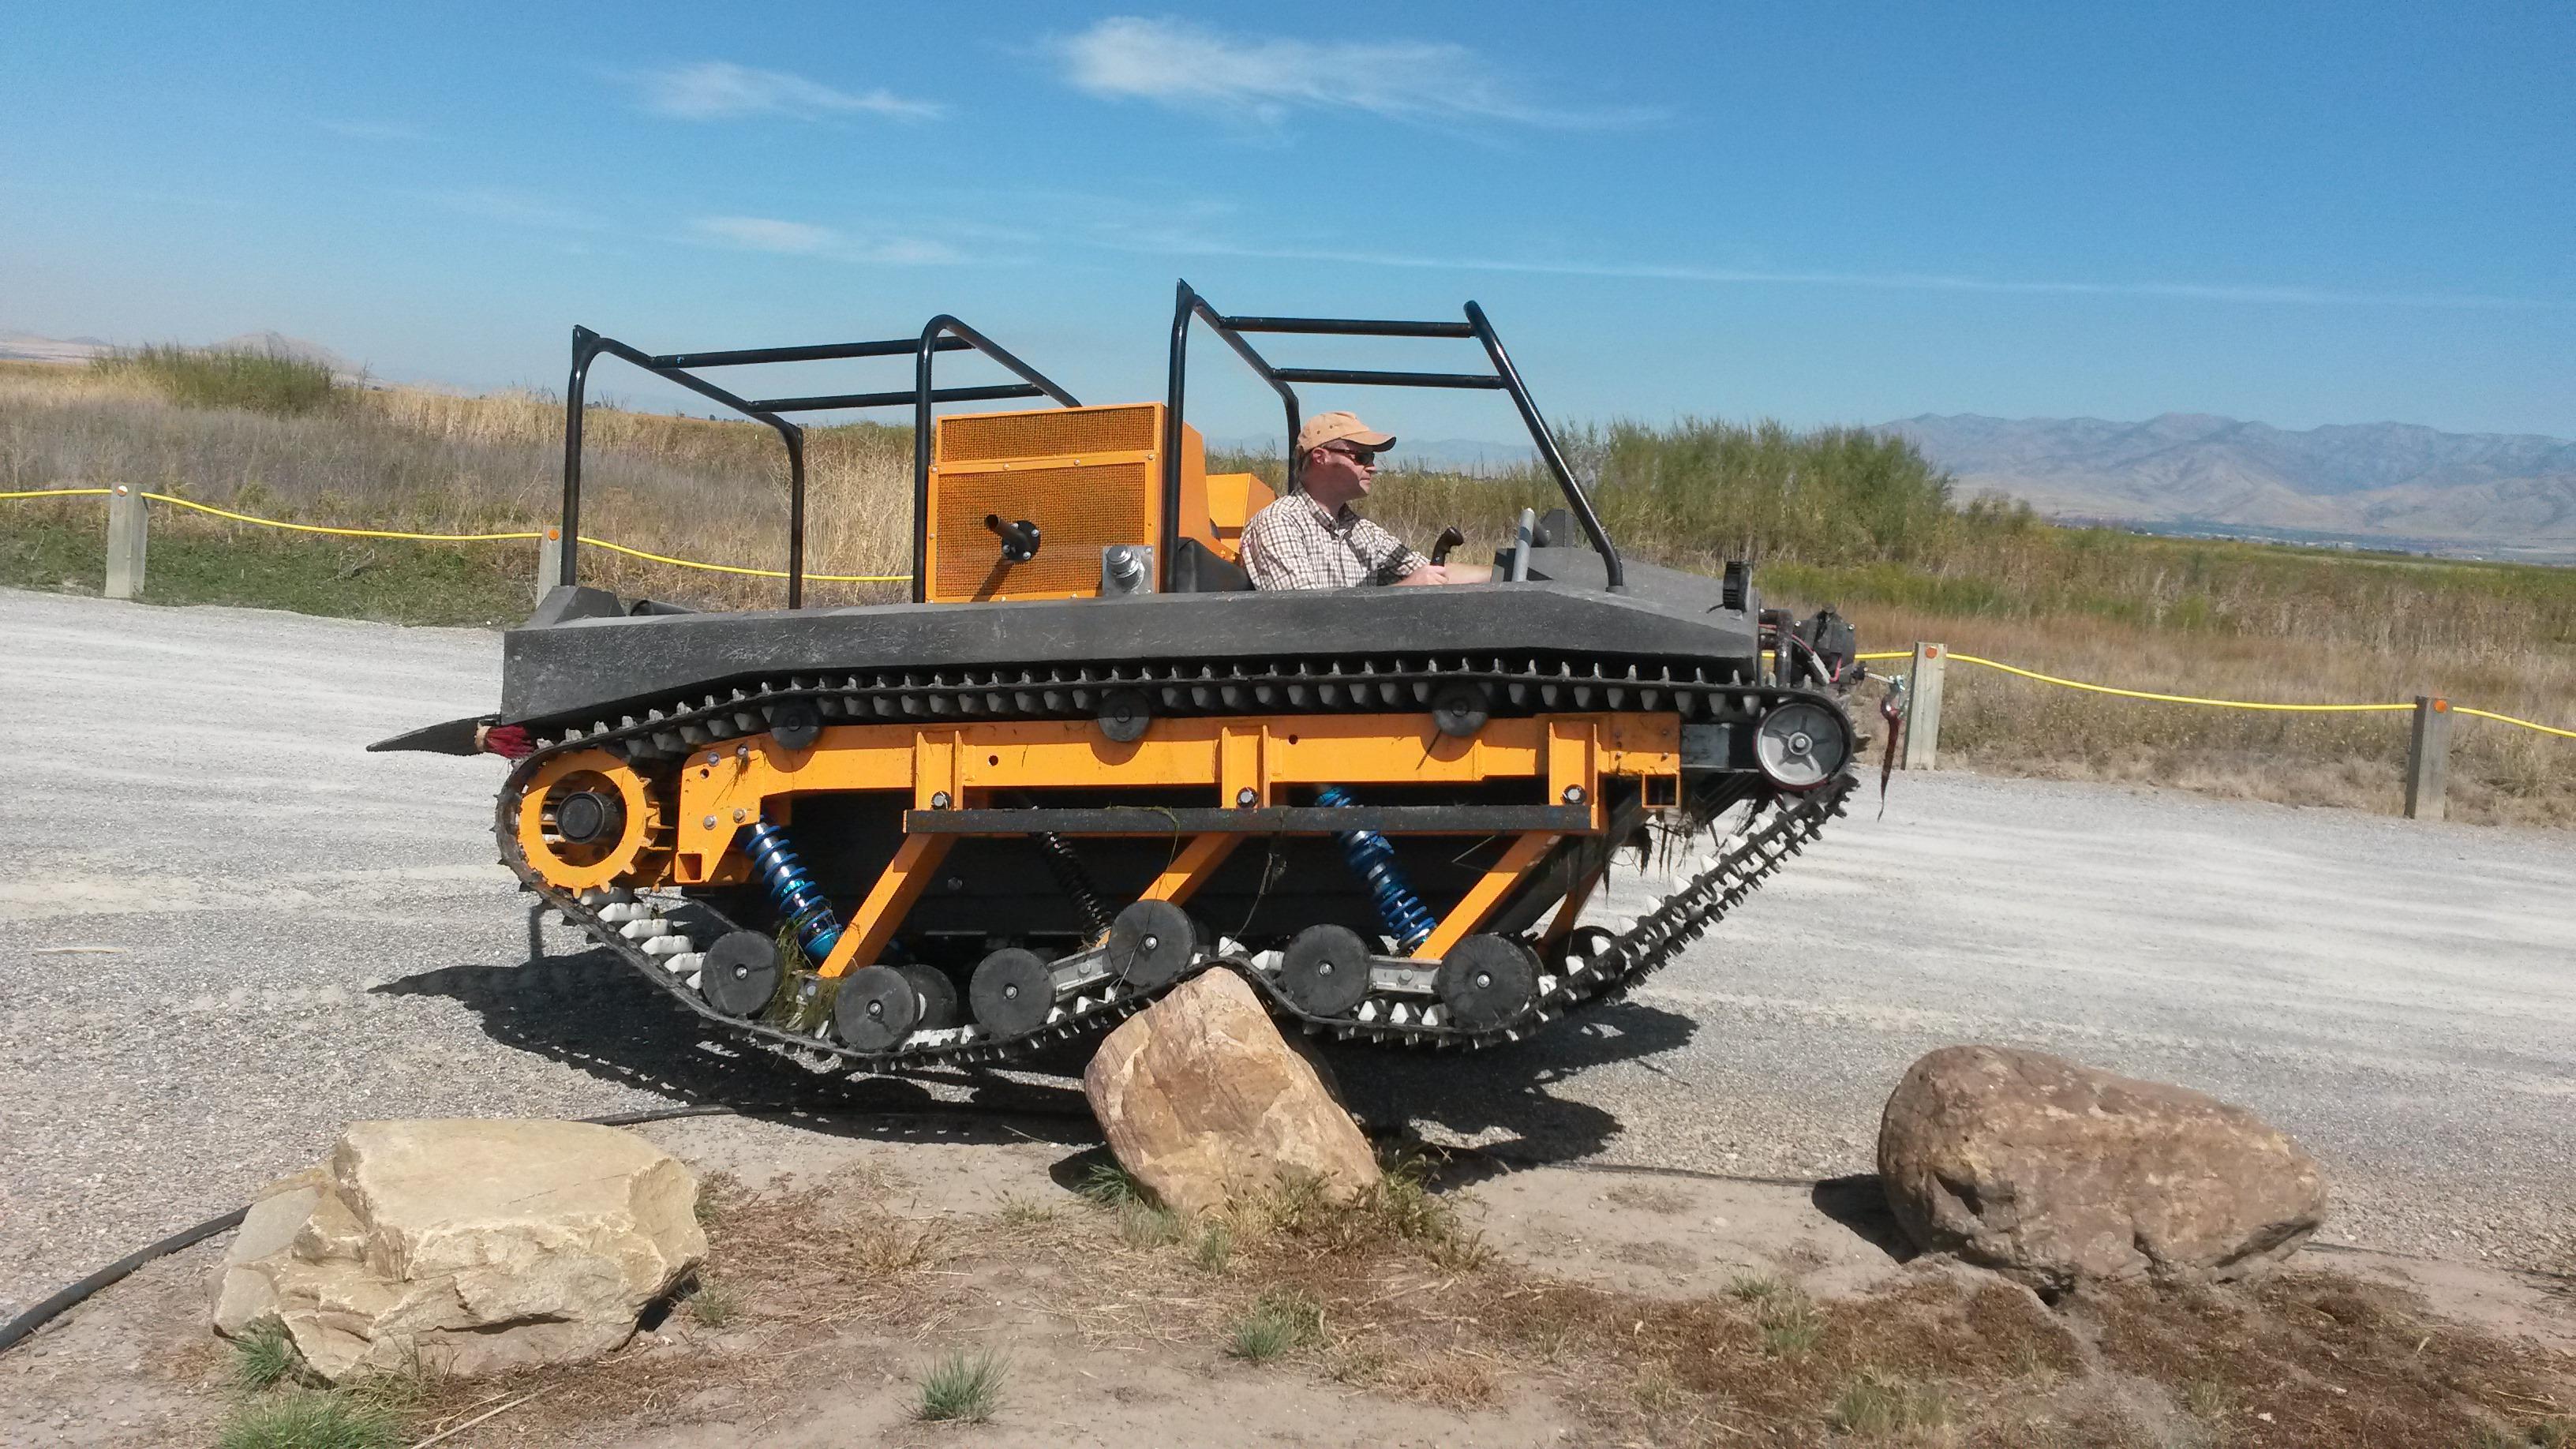 Recreational Personal Tracked Vehicle